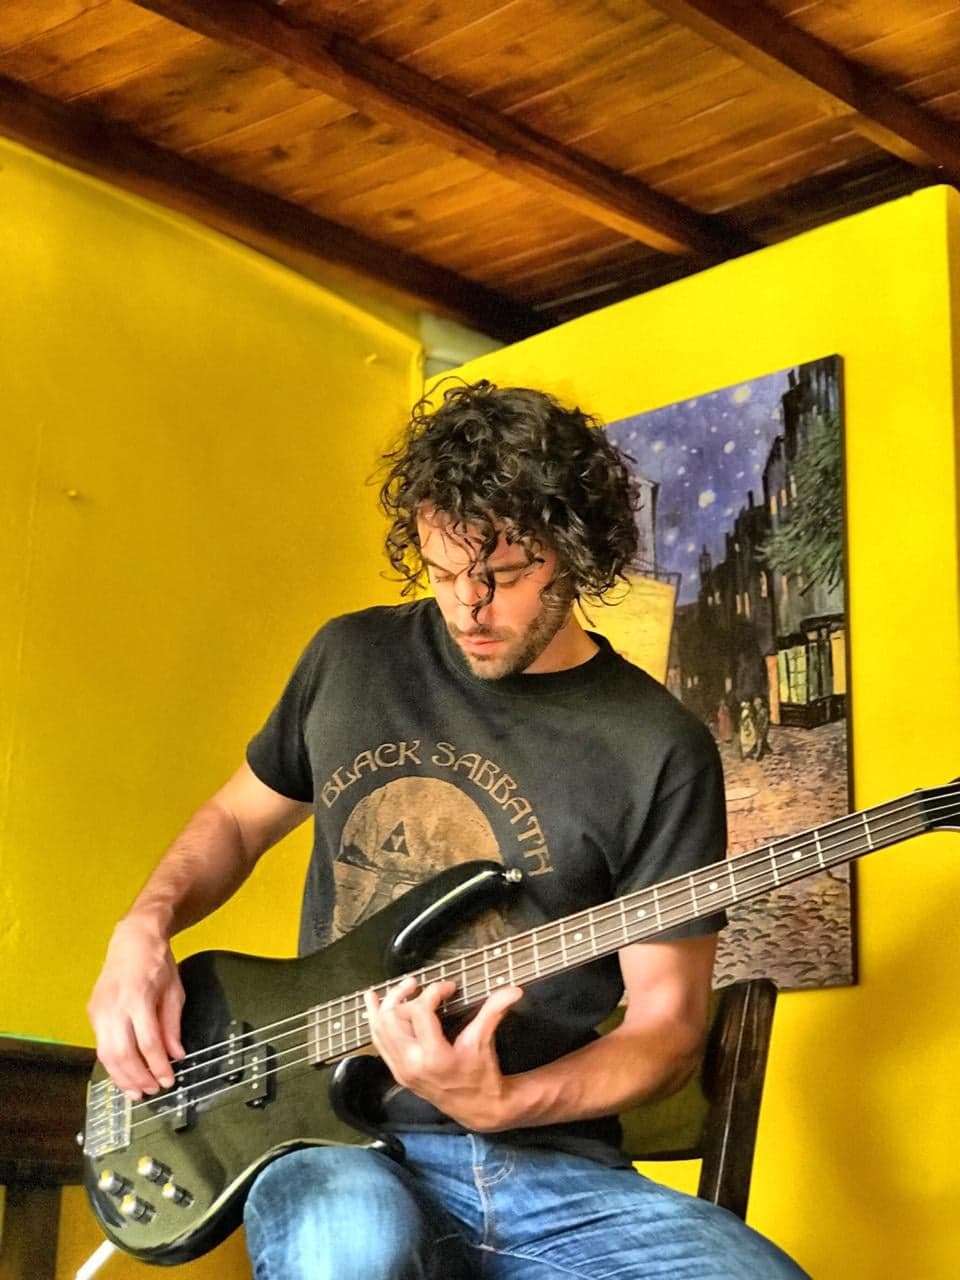 Francis Will plays bass at home in Newfoundland during lockdown, after returning from living in Montreal.